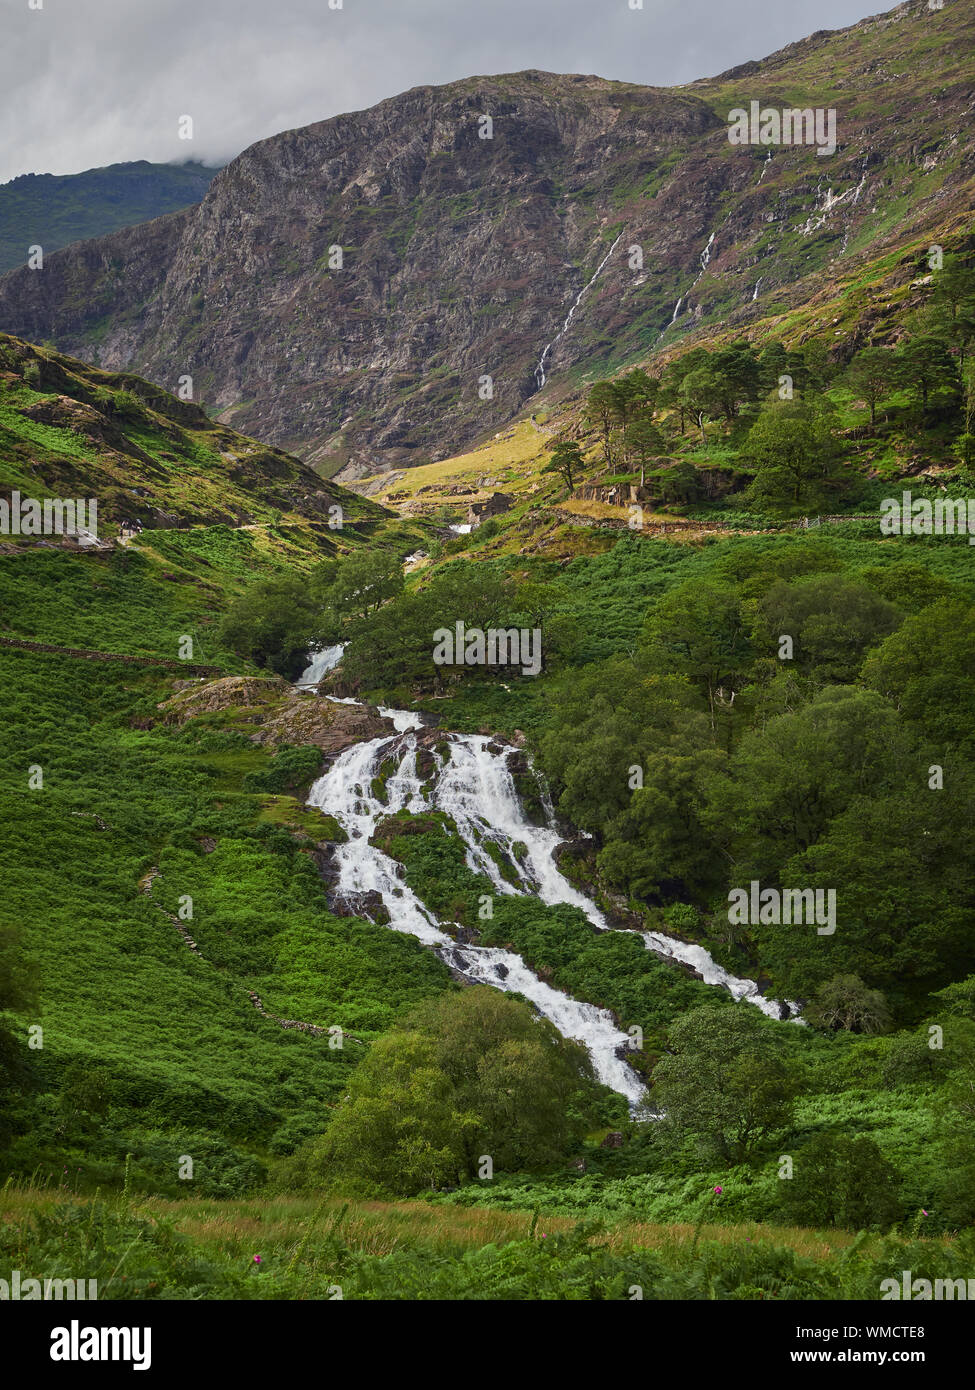 The River Cwn Llan running through The Snowdonia National Park on the Watkin Path with mountains in the background, Wales, UK Stock Photo